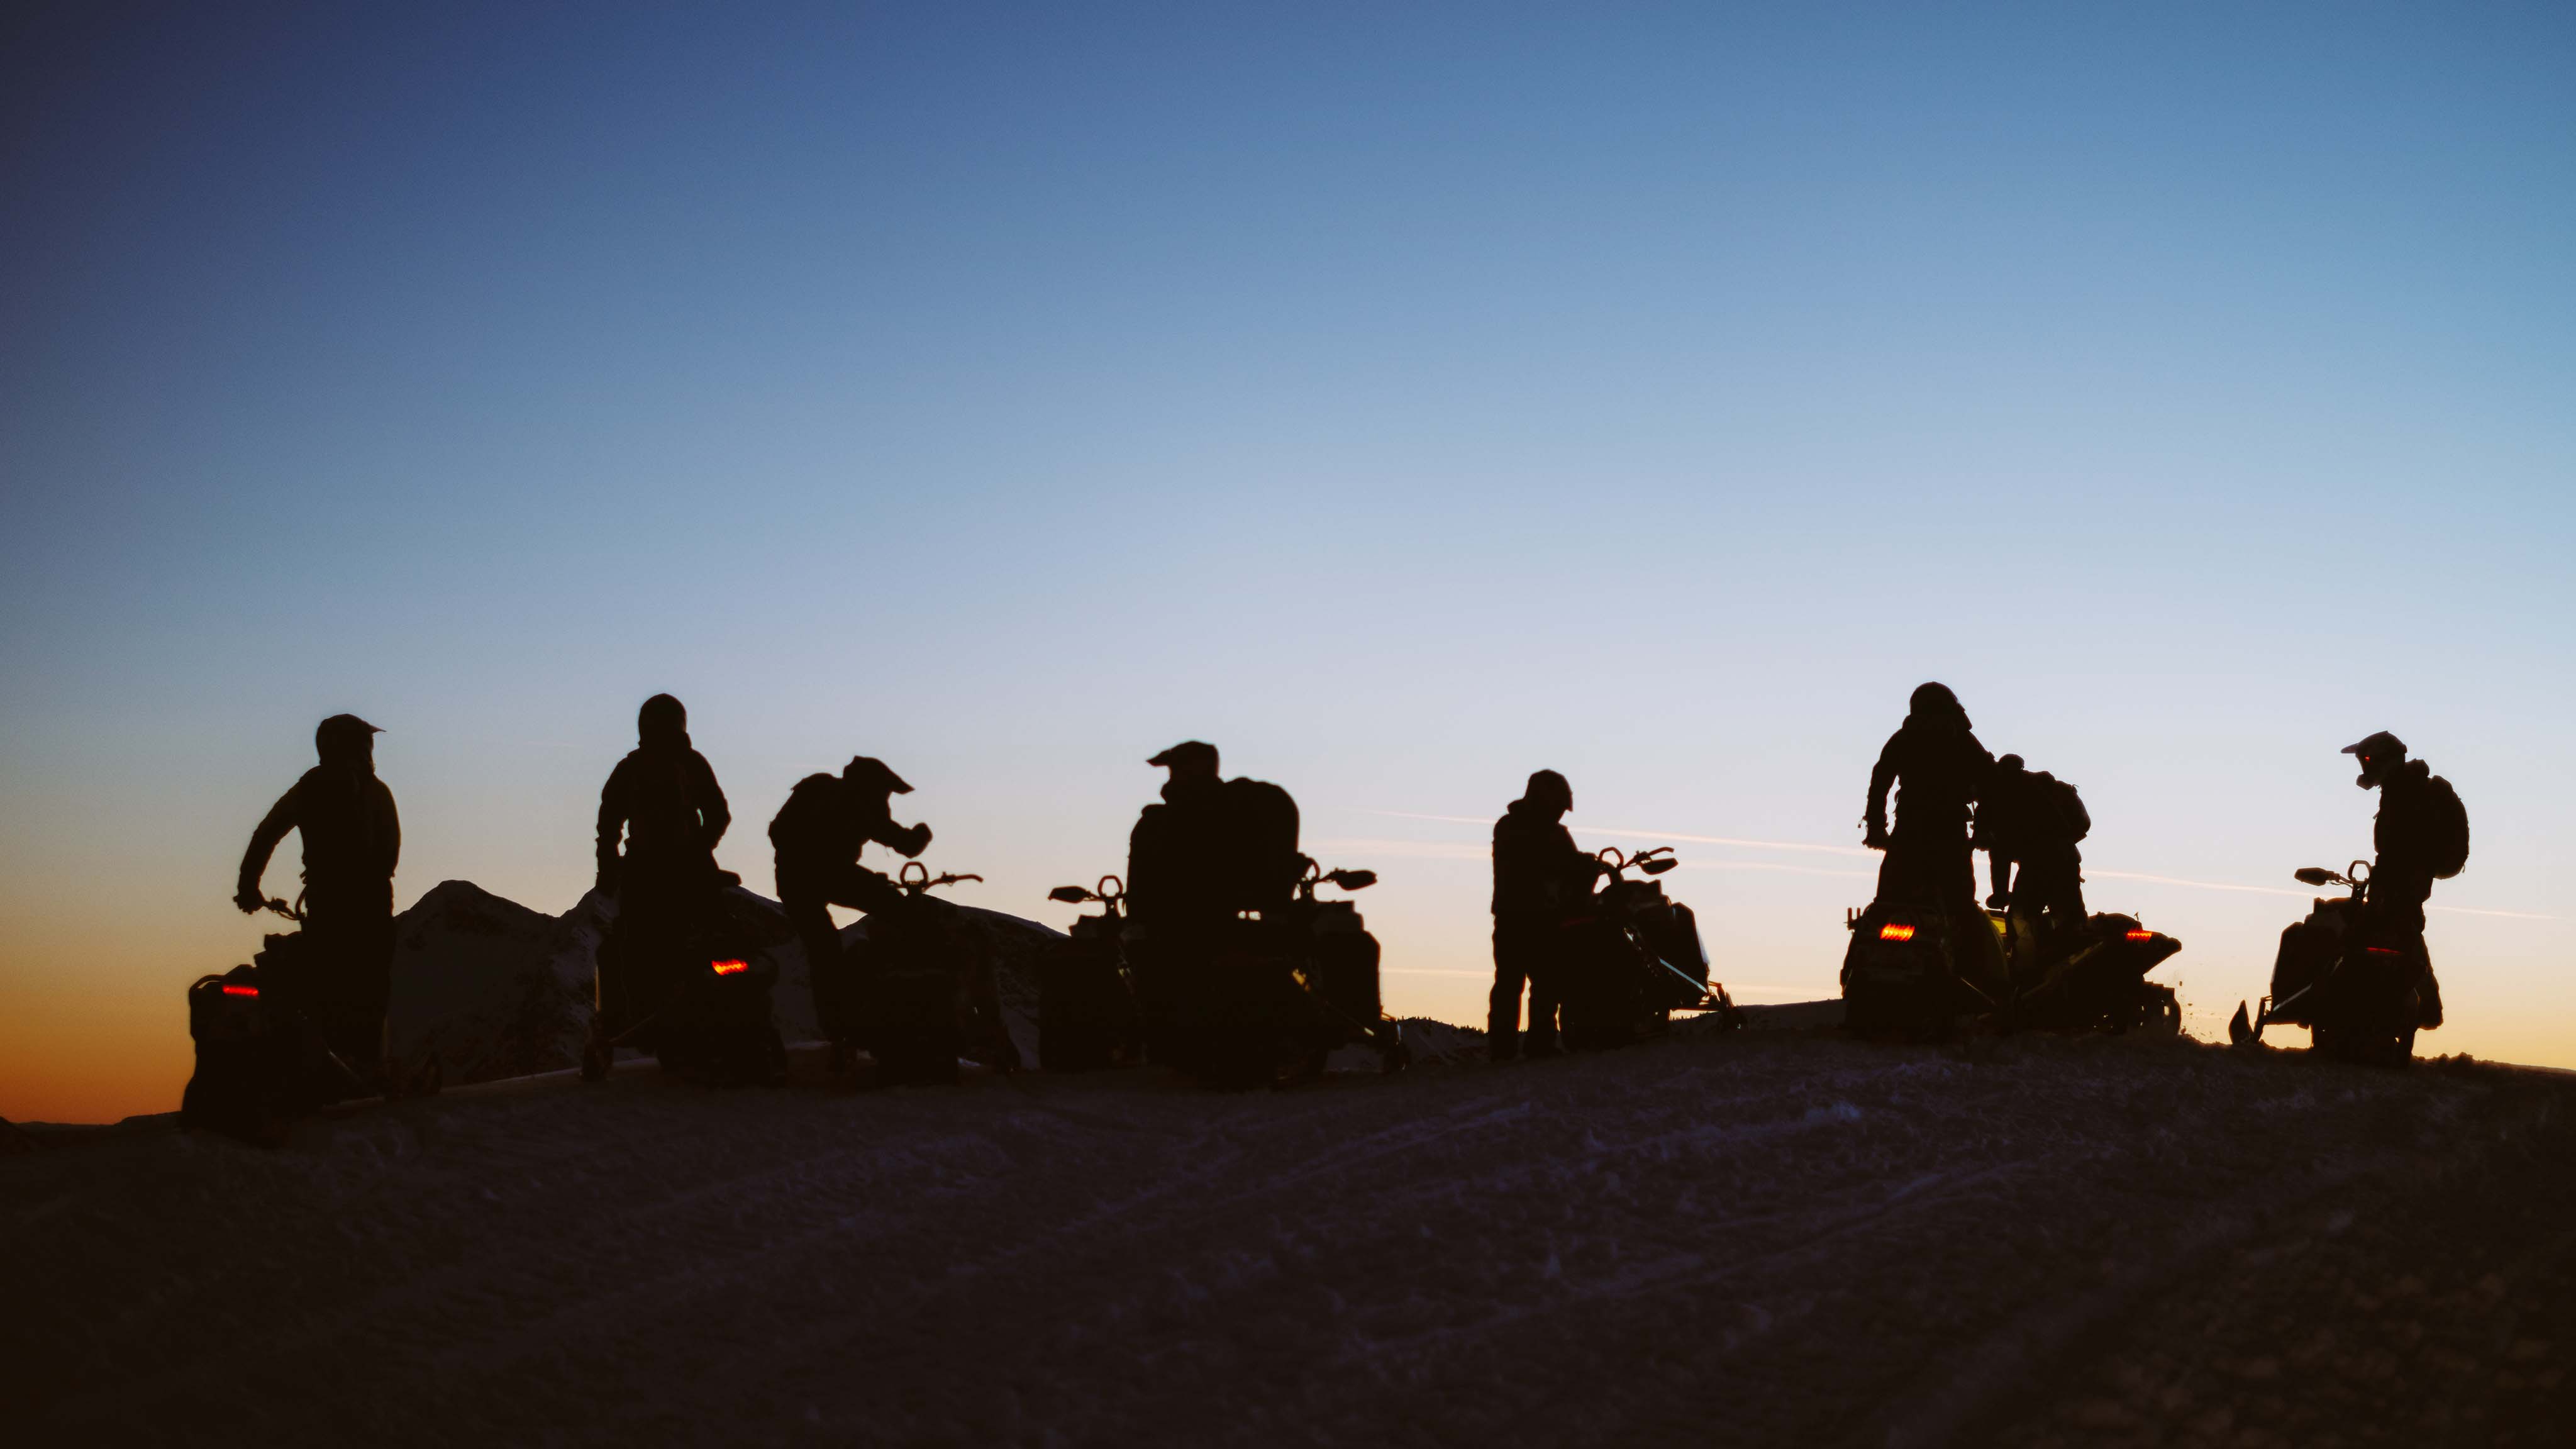 7 Ski-Doo riders stopped on a dawn ride